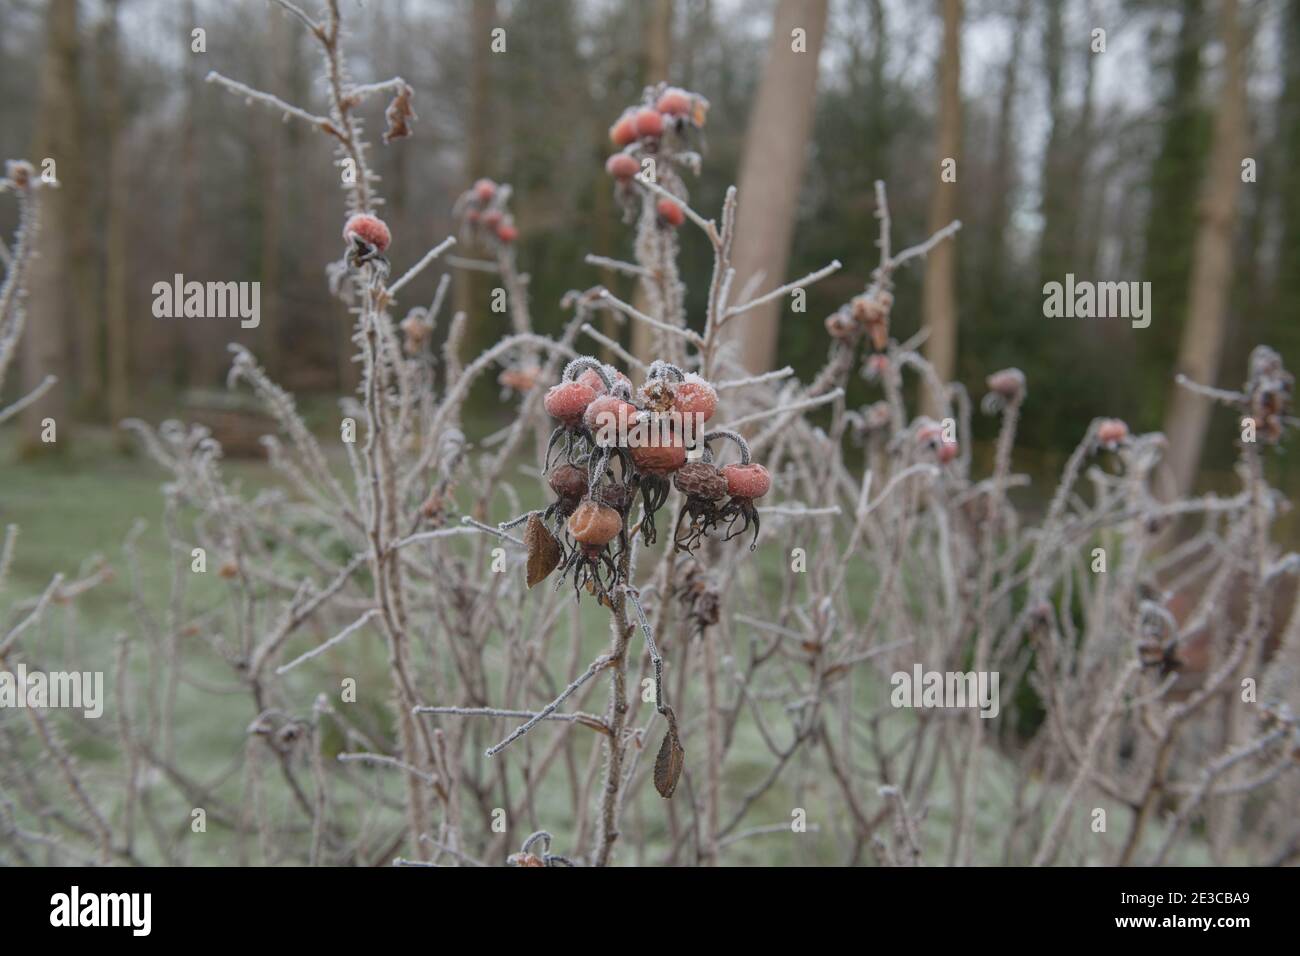 Winter Frost on the Rosehips of a Red Japanese Rose Shrub (Rosa rugosa 'Rubra') Growing in a Garden in Rural Devon, England, UK Stock Photo